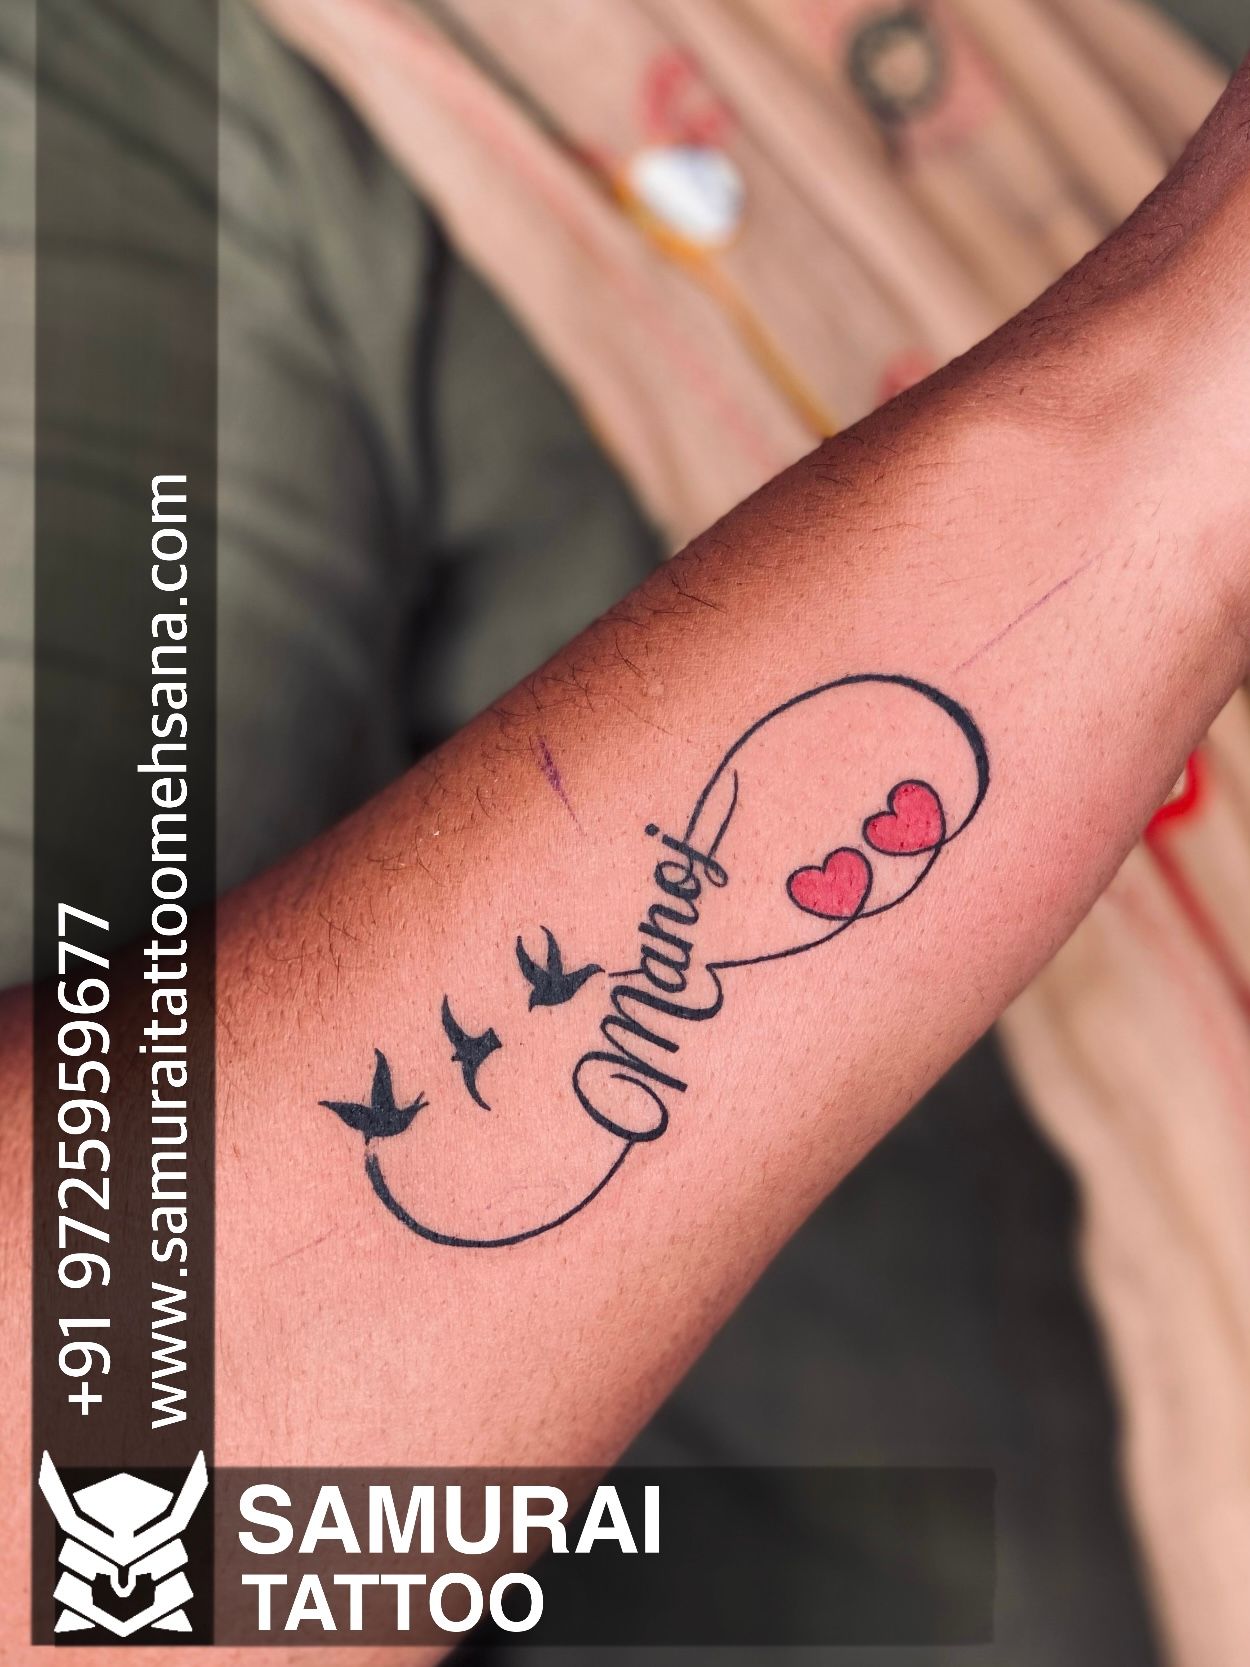 2023 Tattoo Trends That Are in and Out, According to Tattoo Artists